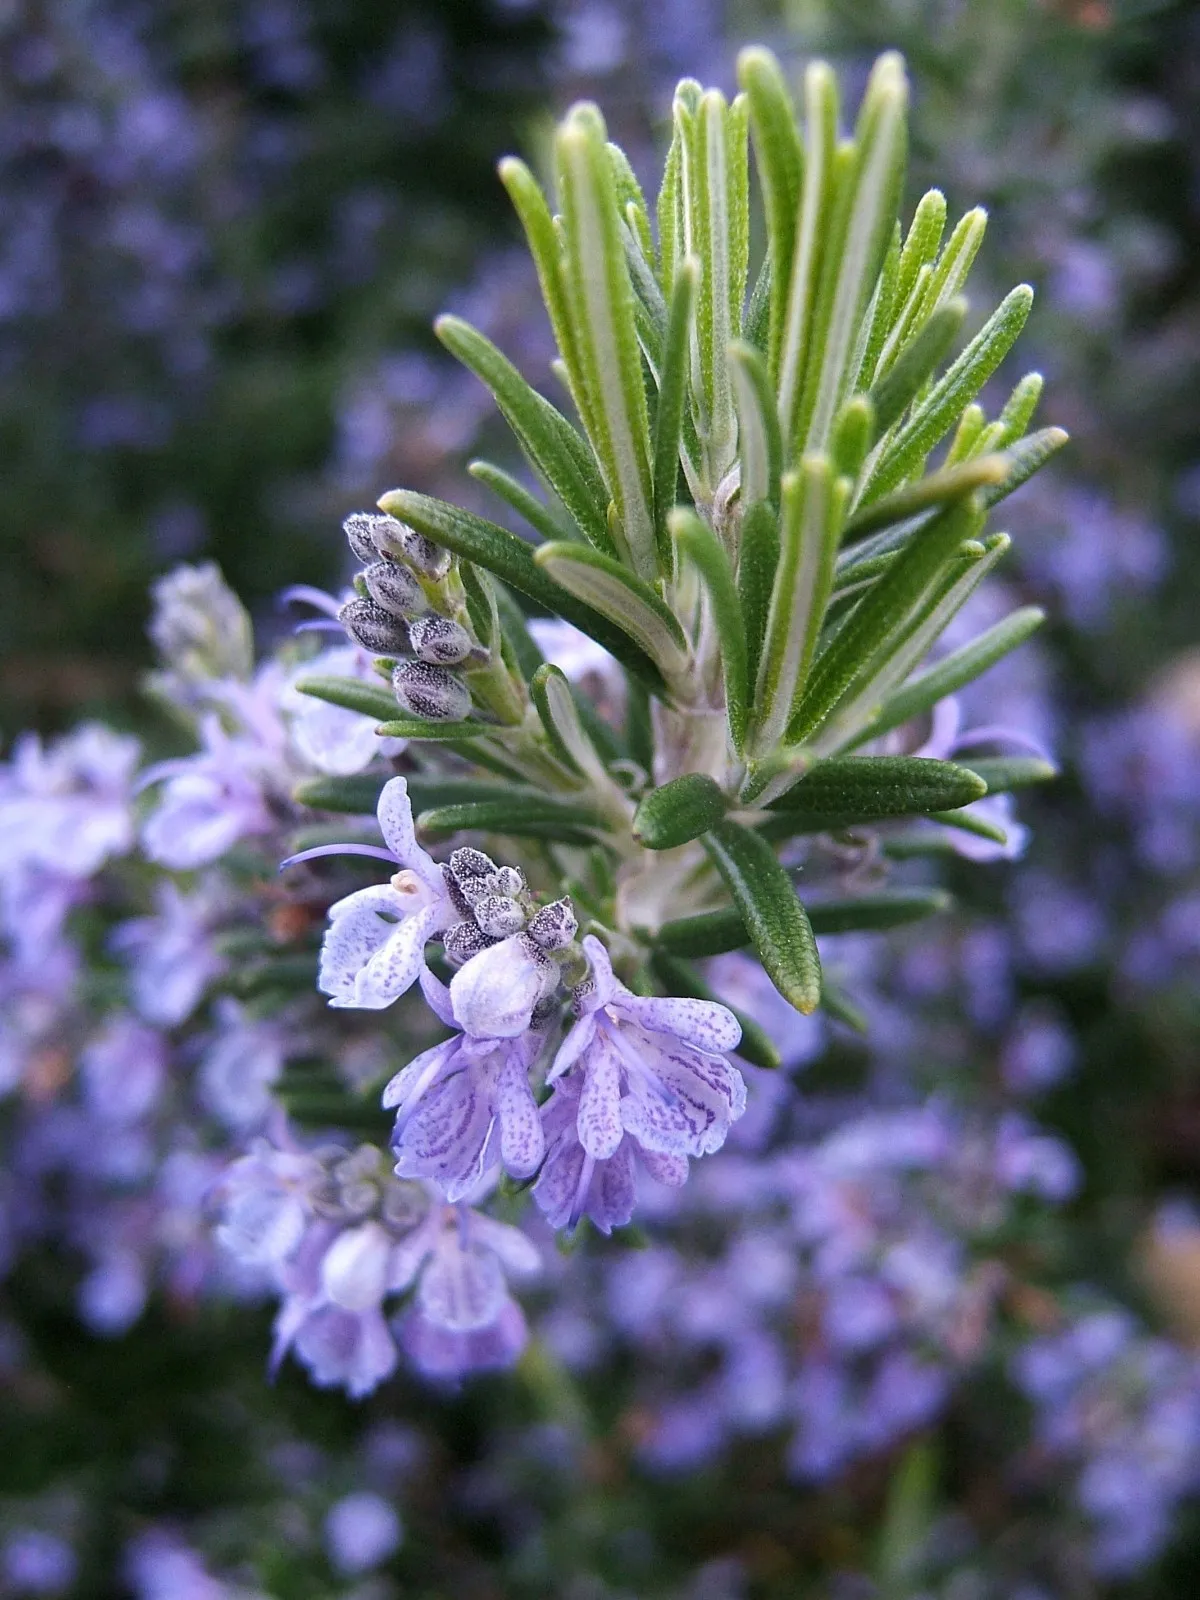 Rosemary NON-GMO, Heirloom, Variety Sizes, Anthos 50 seeds - $3.99